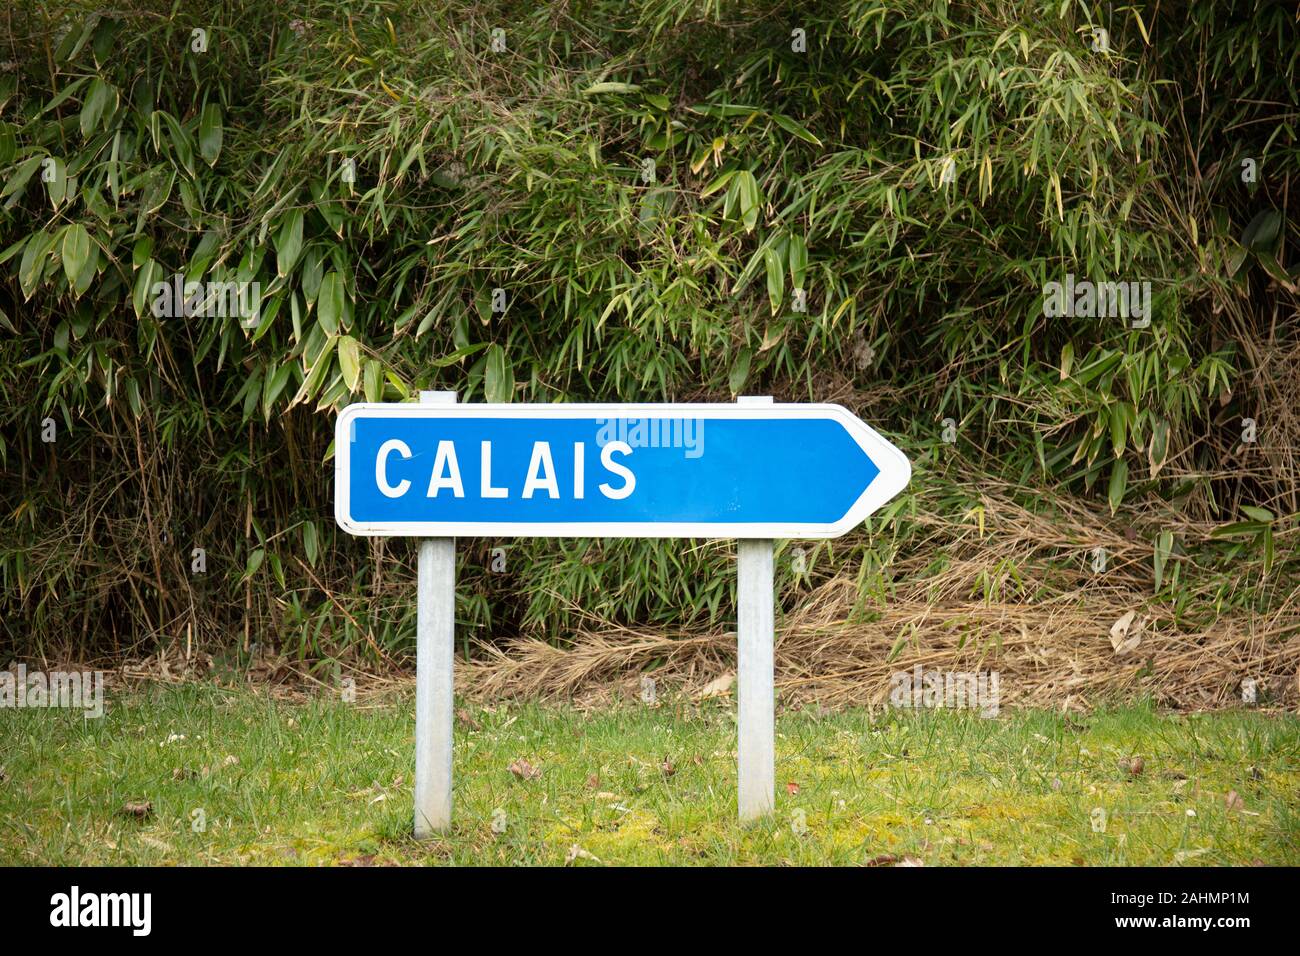 French Road Sign Indicating Direction to Calais via Motorway With Foliage Behind Stock Photo